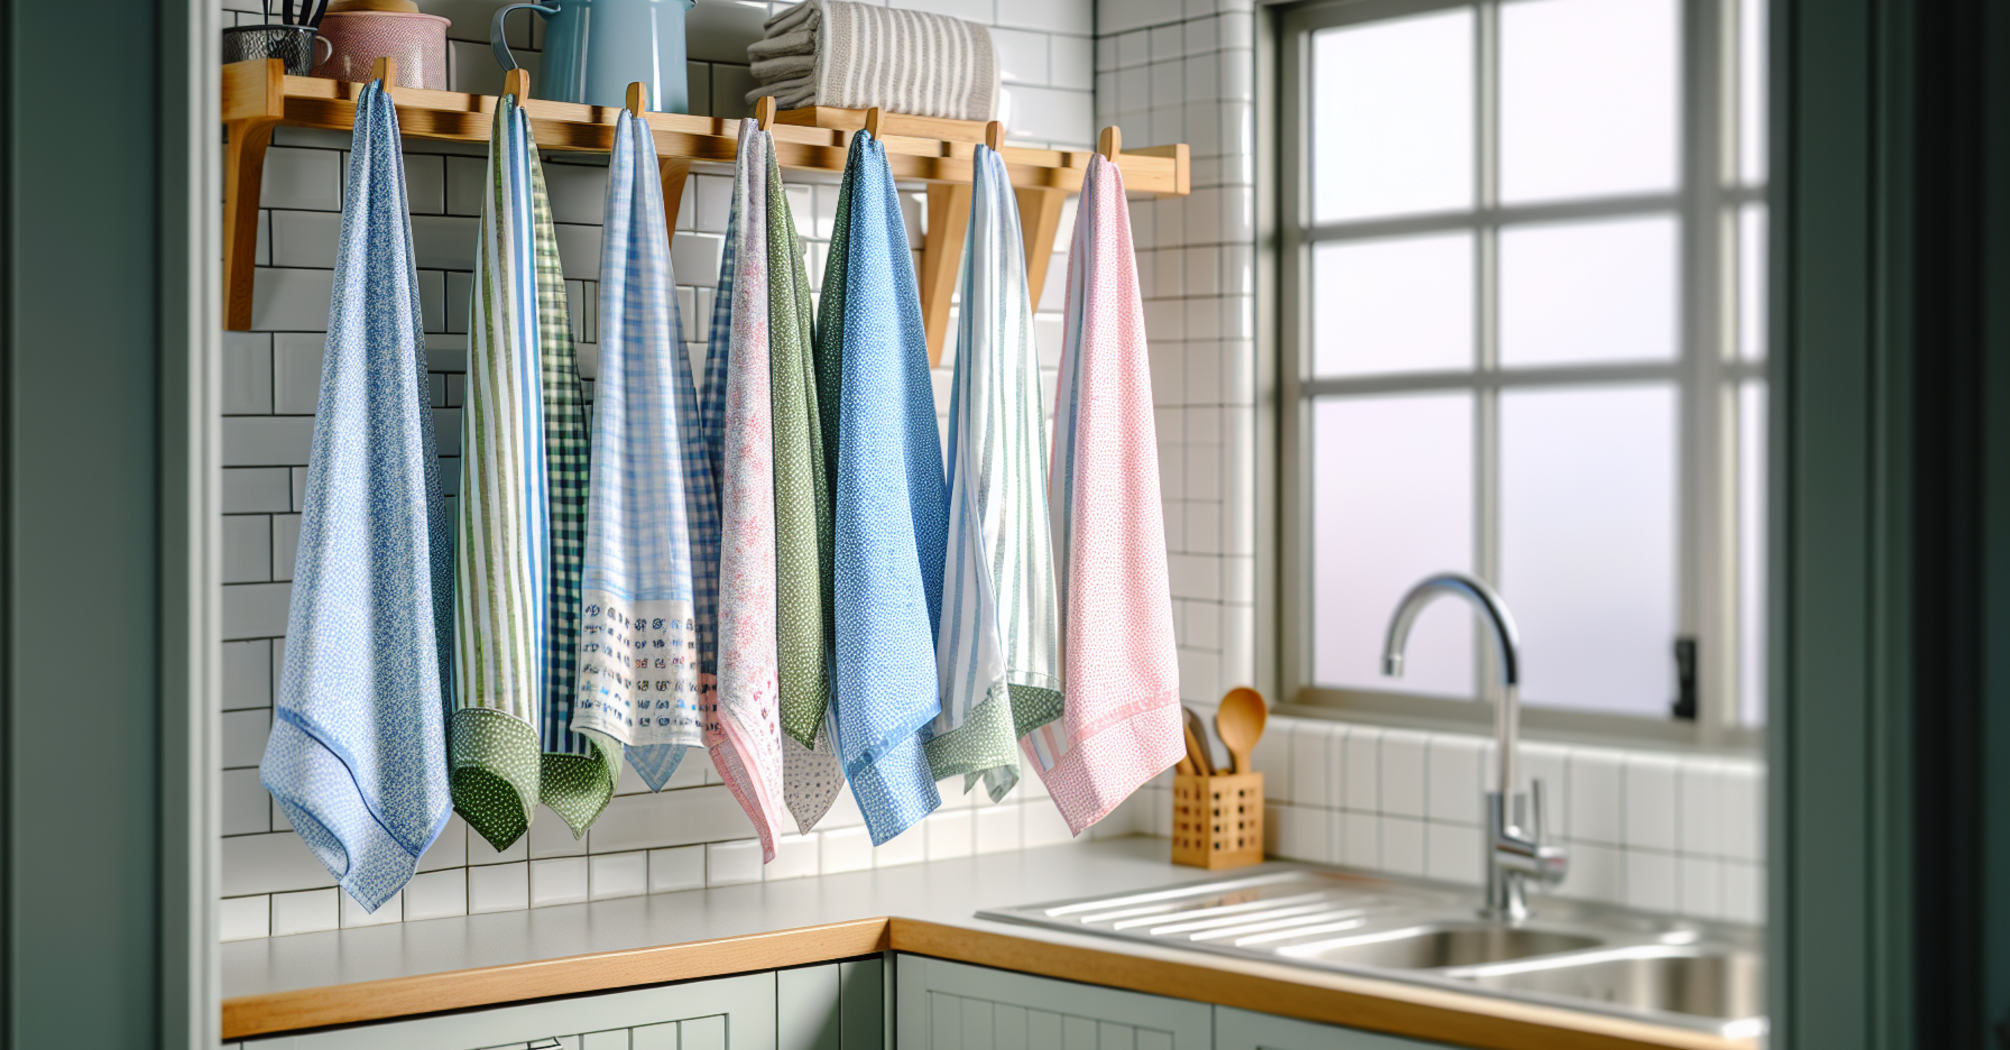 Even old kitchen towels will be as good as new